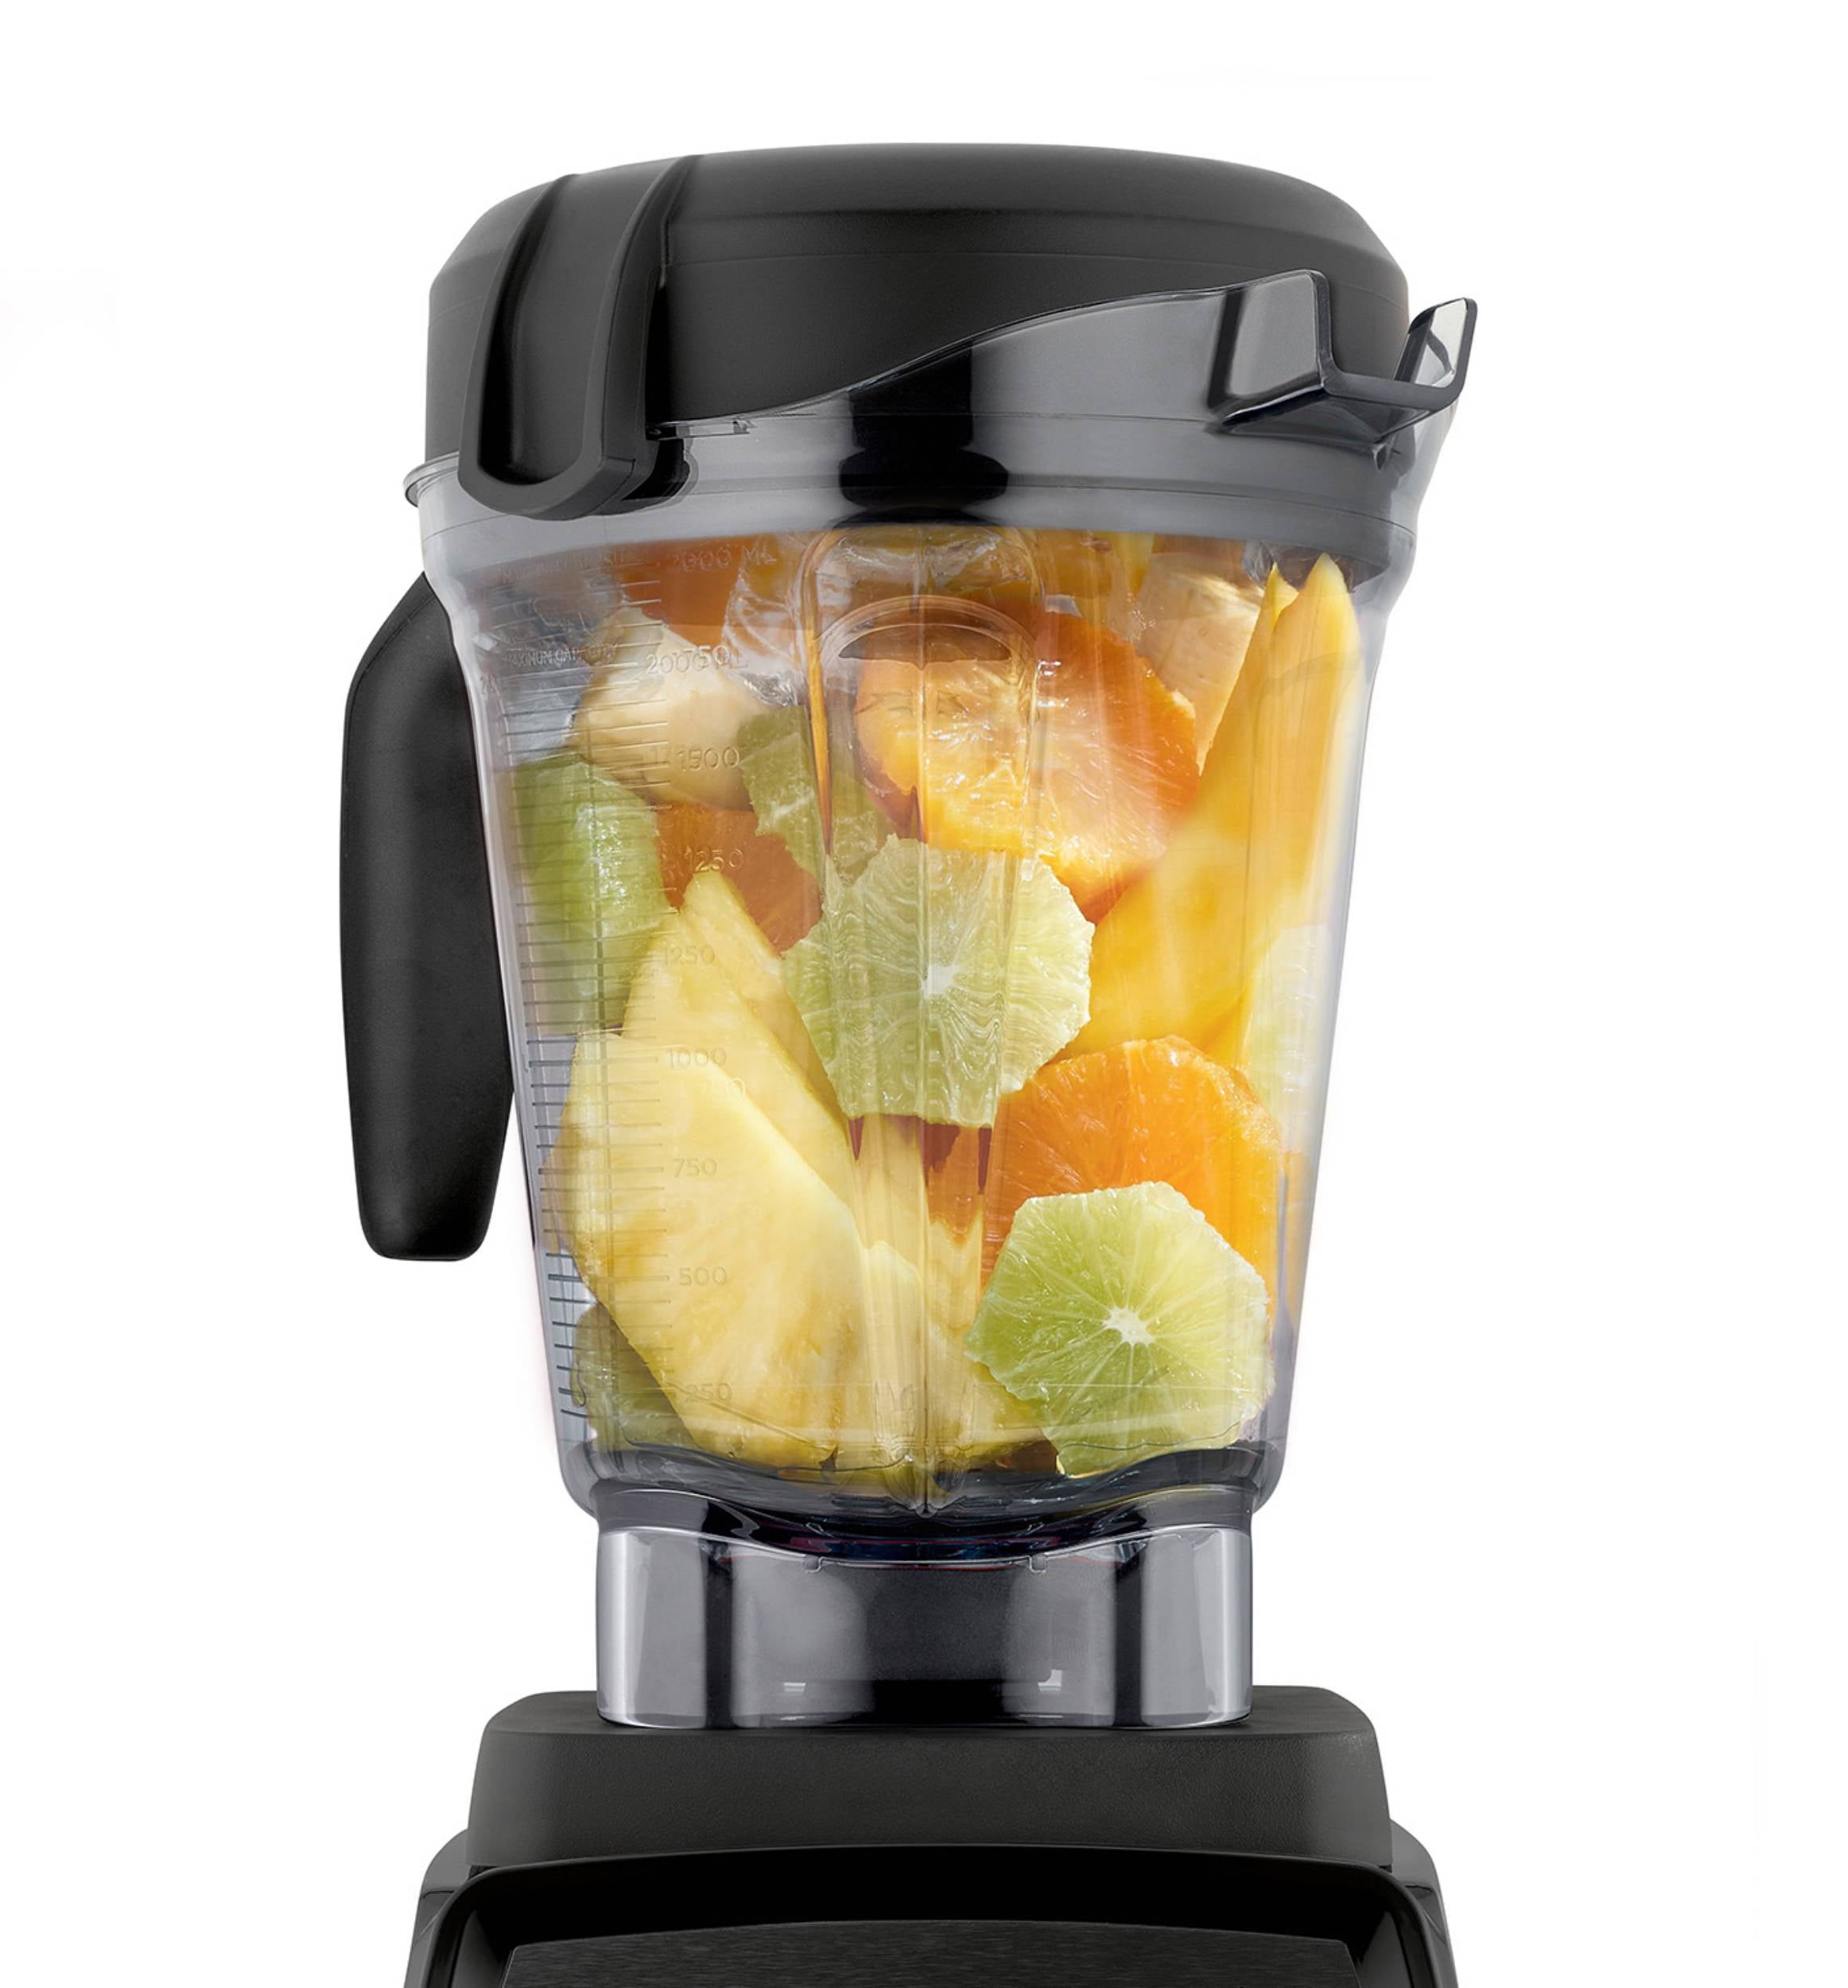 Vitamix 752 64 oz Blender Container without Lid - Ford Hotel Supply